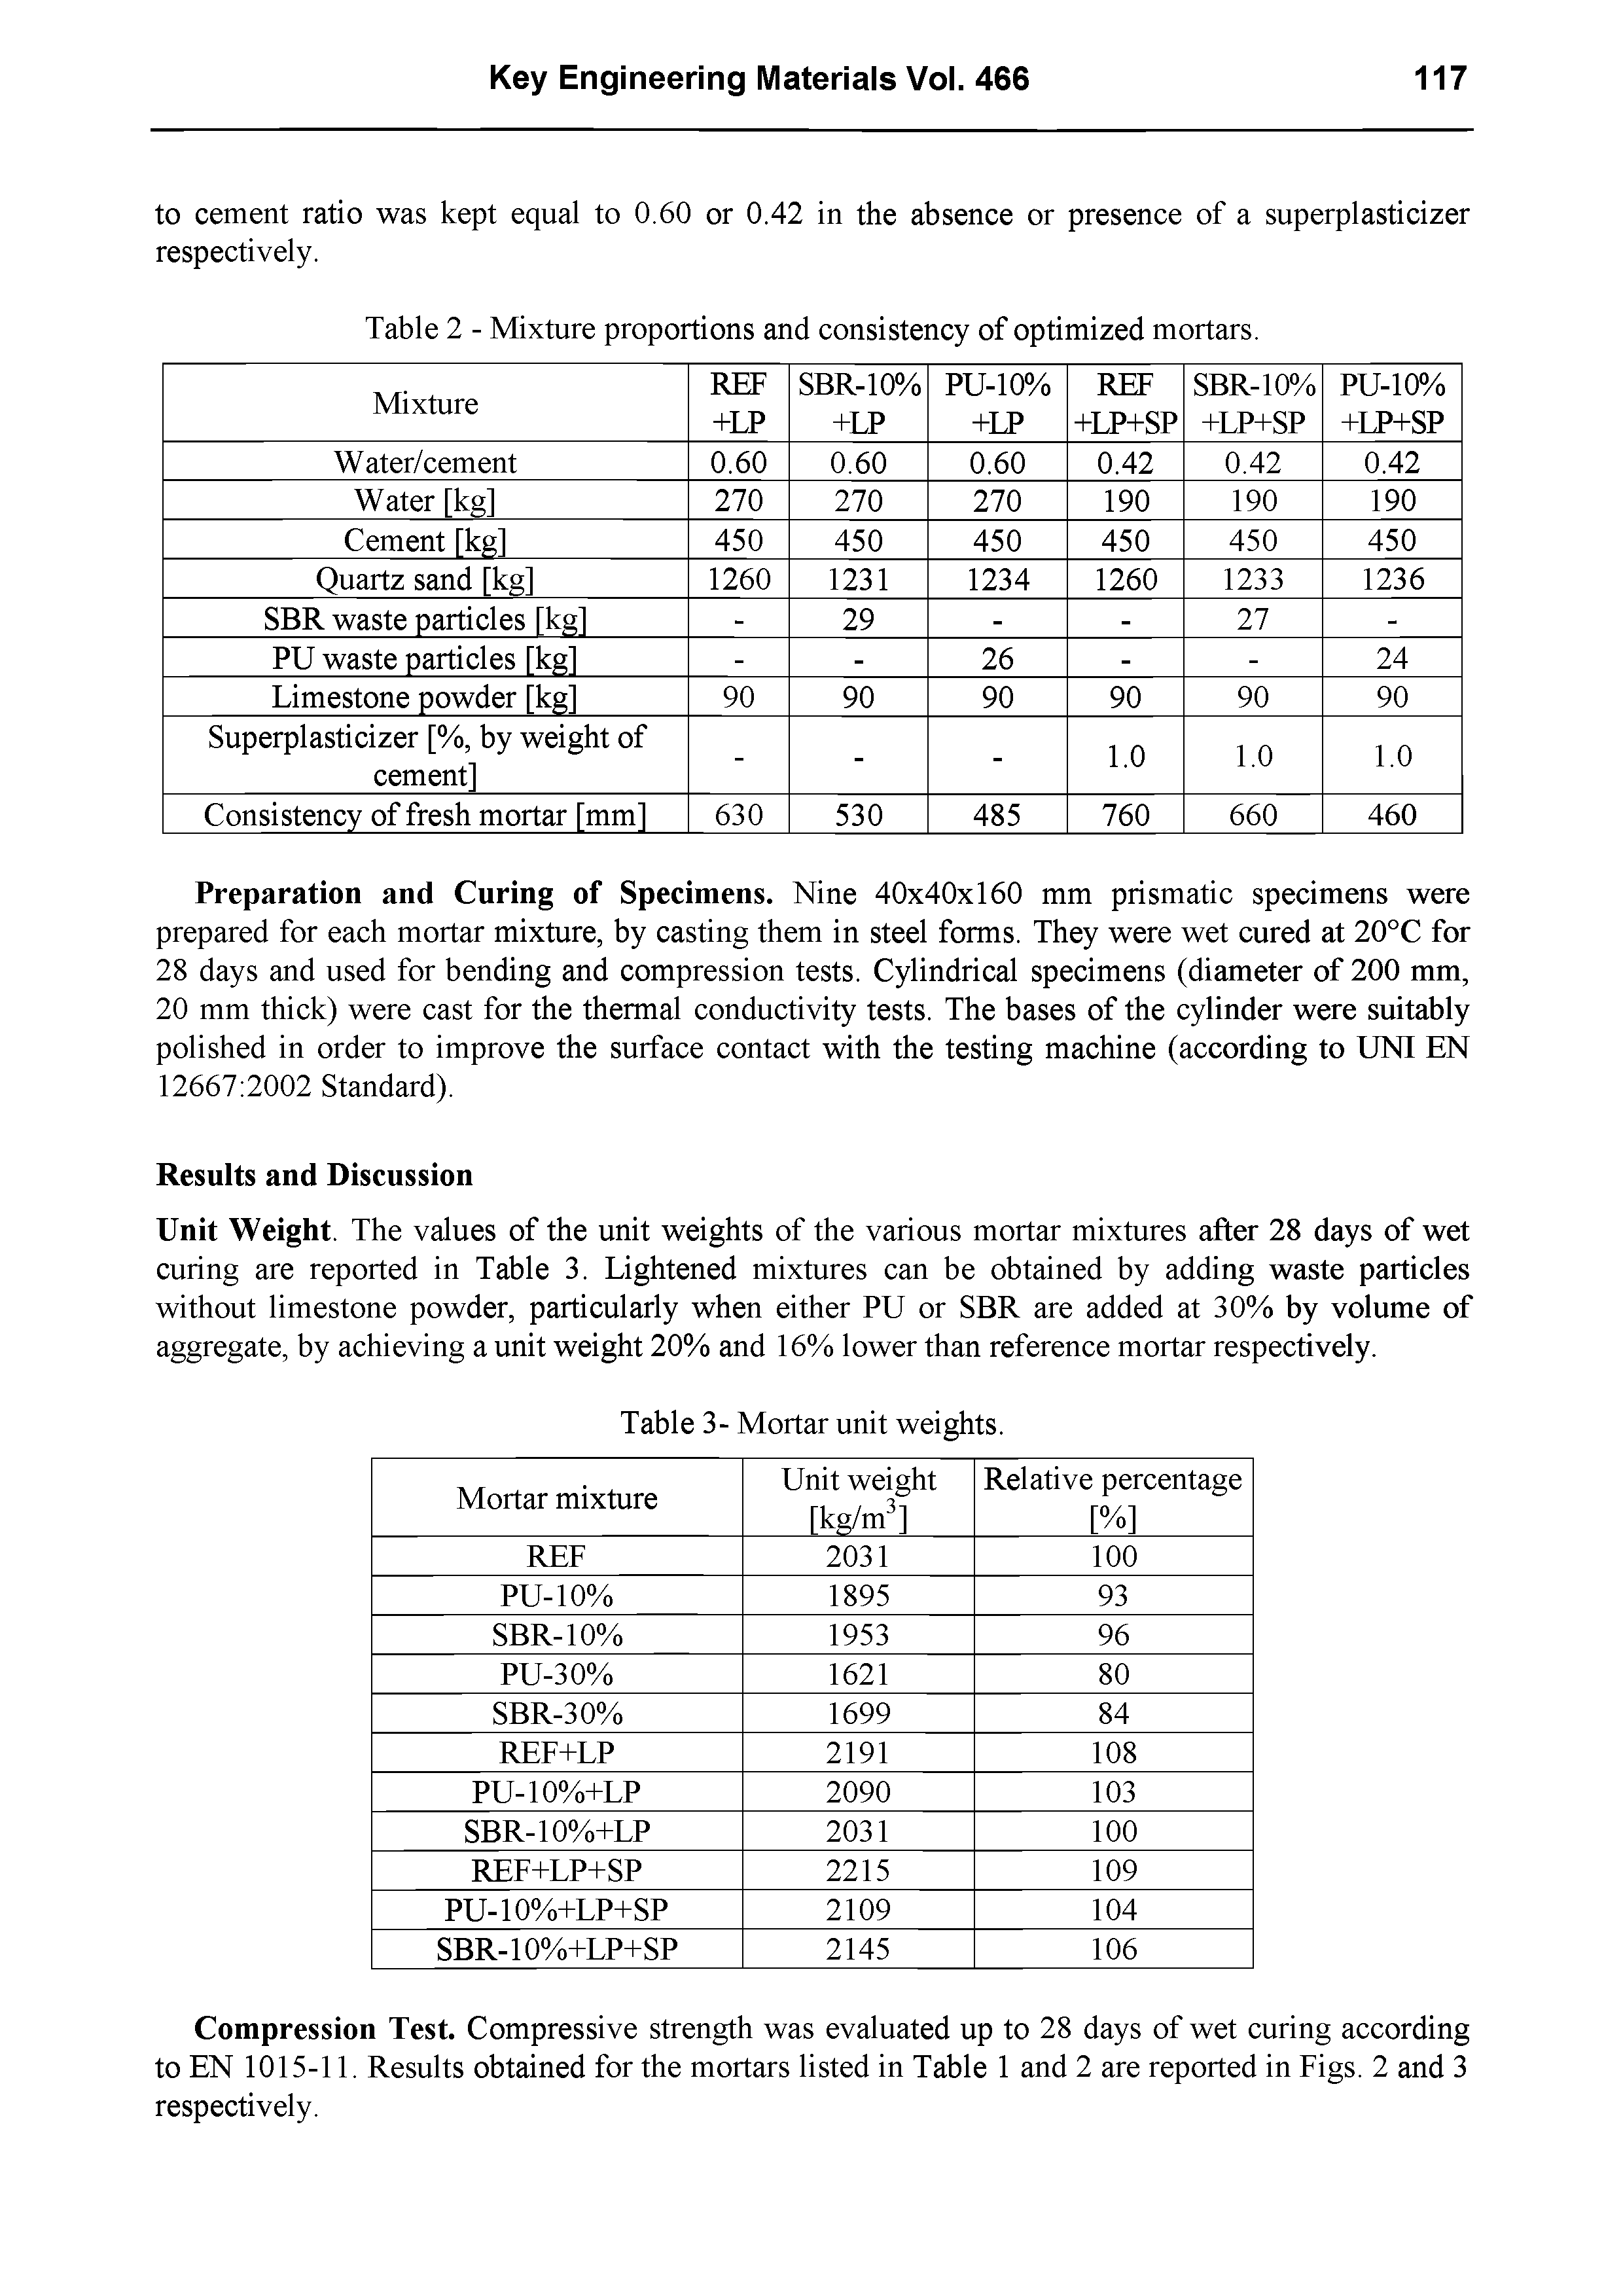 Table 2 - Mixture proportions and consistency of optimized mortars.